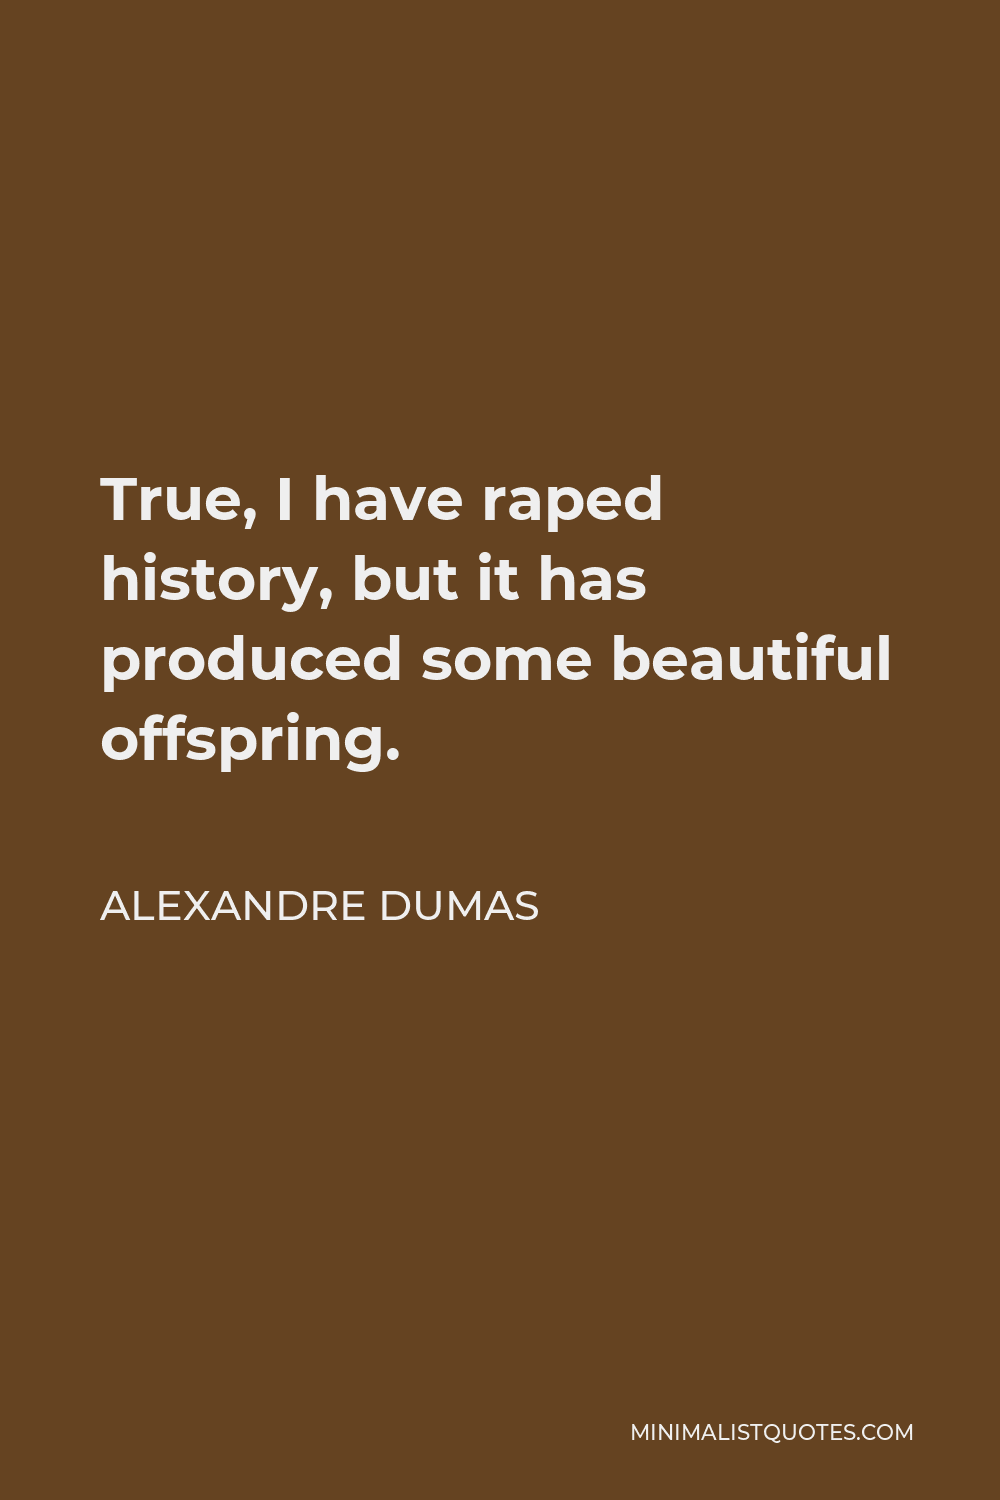 Alexandre Dumas Quote - True, I have raped history, but it has produced some beautiful offspring.